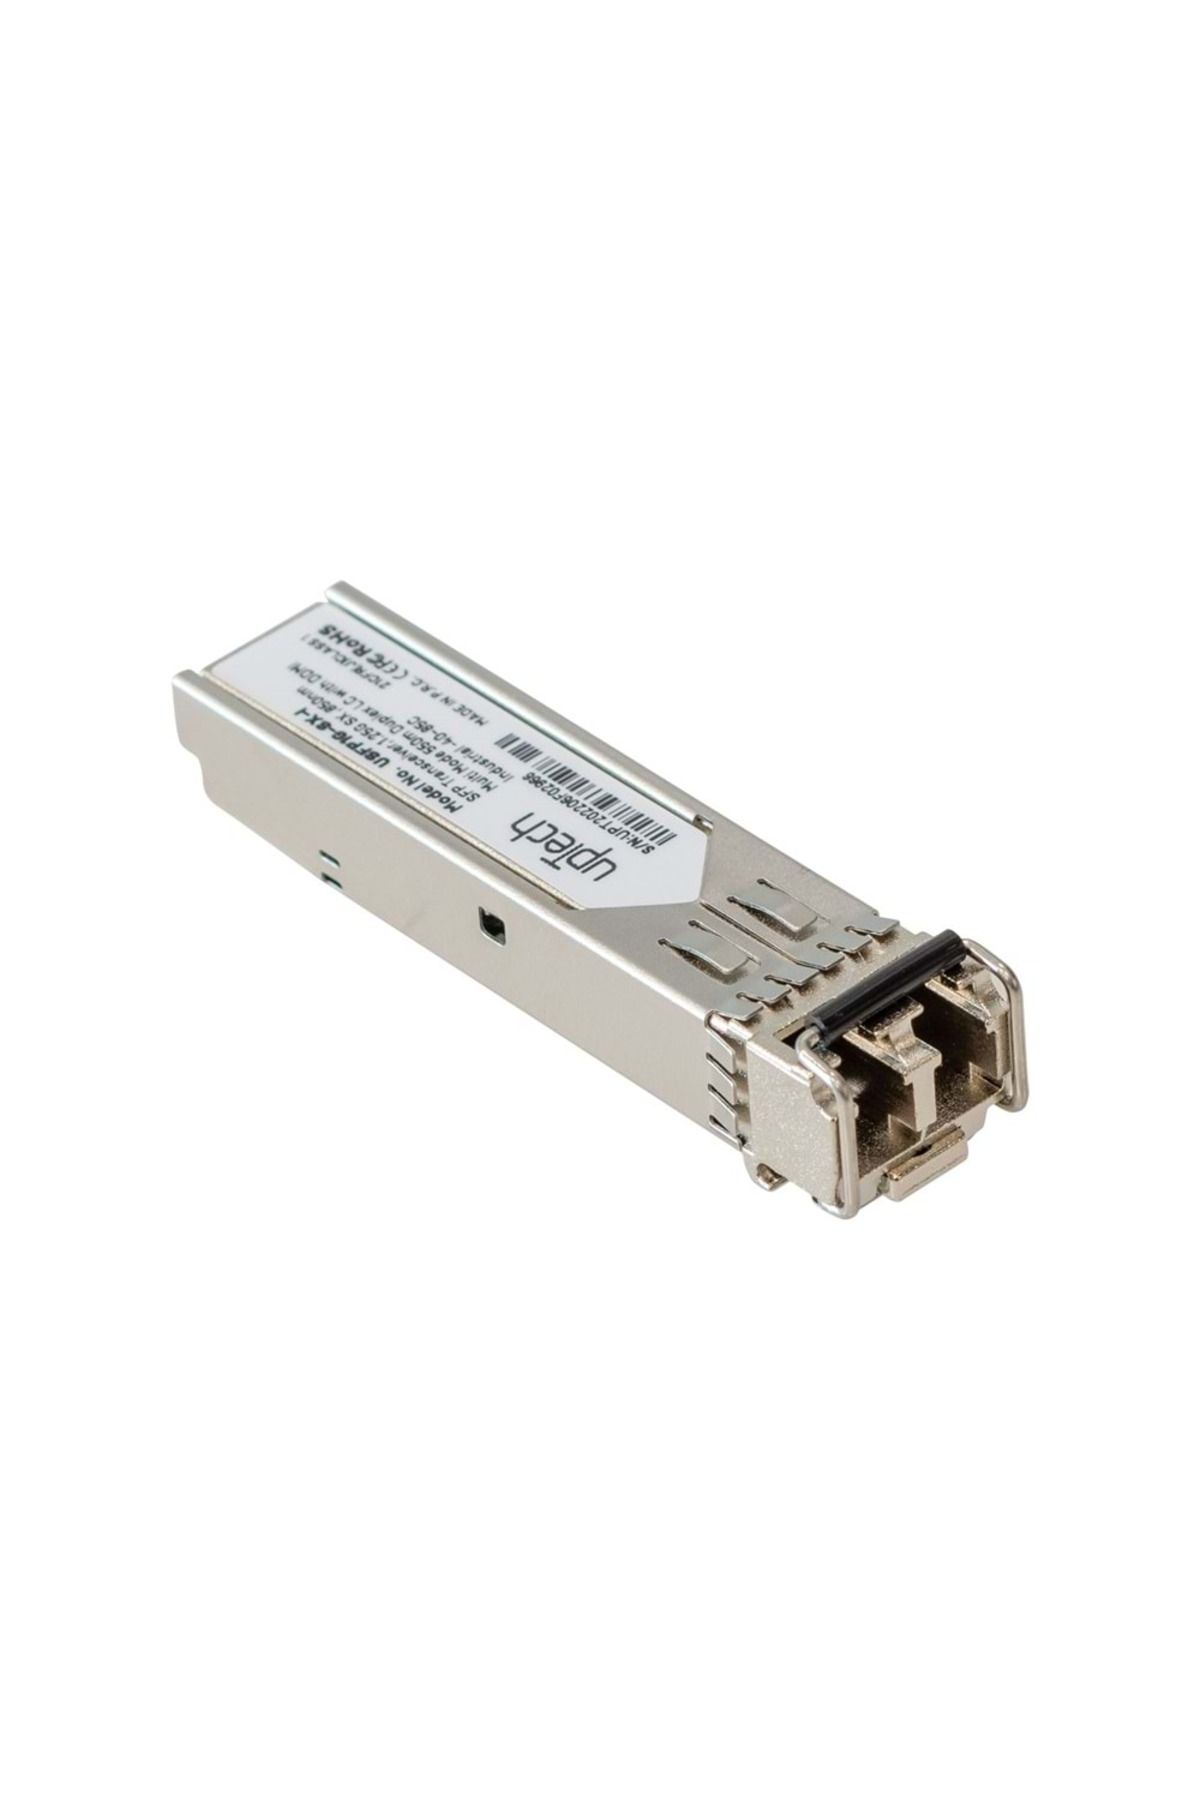 upTech SFP Transceiver 1.25G SX 850nm MultiMode 550m Duplex LC with DDMI Industrial -40-85C